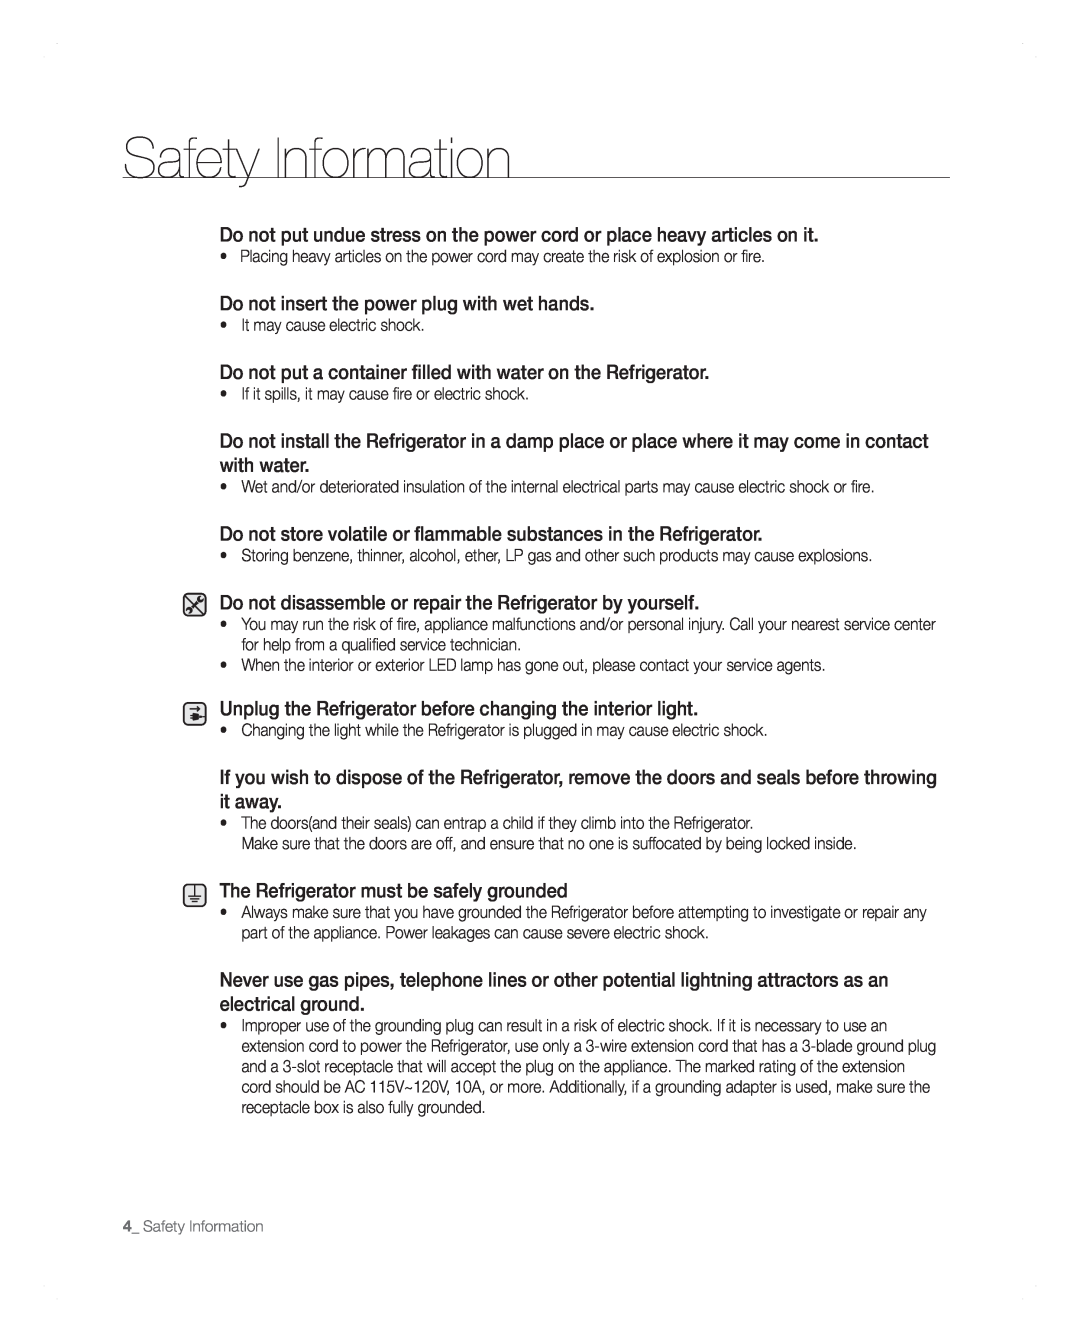 Samsung RFG297AARS user manual Safety Information, Do not insert the power plug with wet hands 